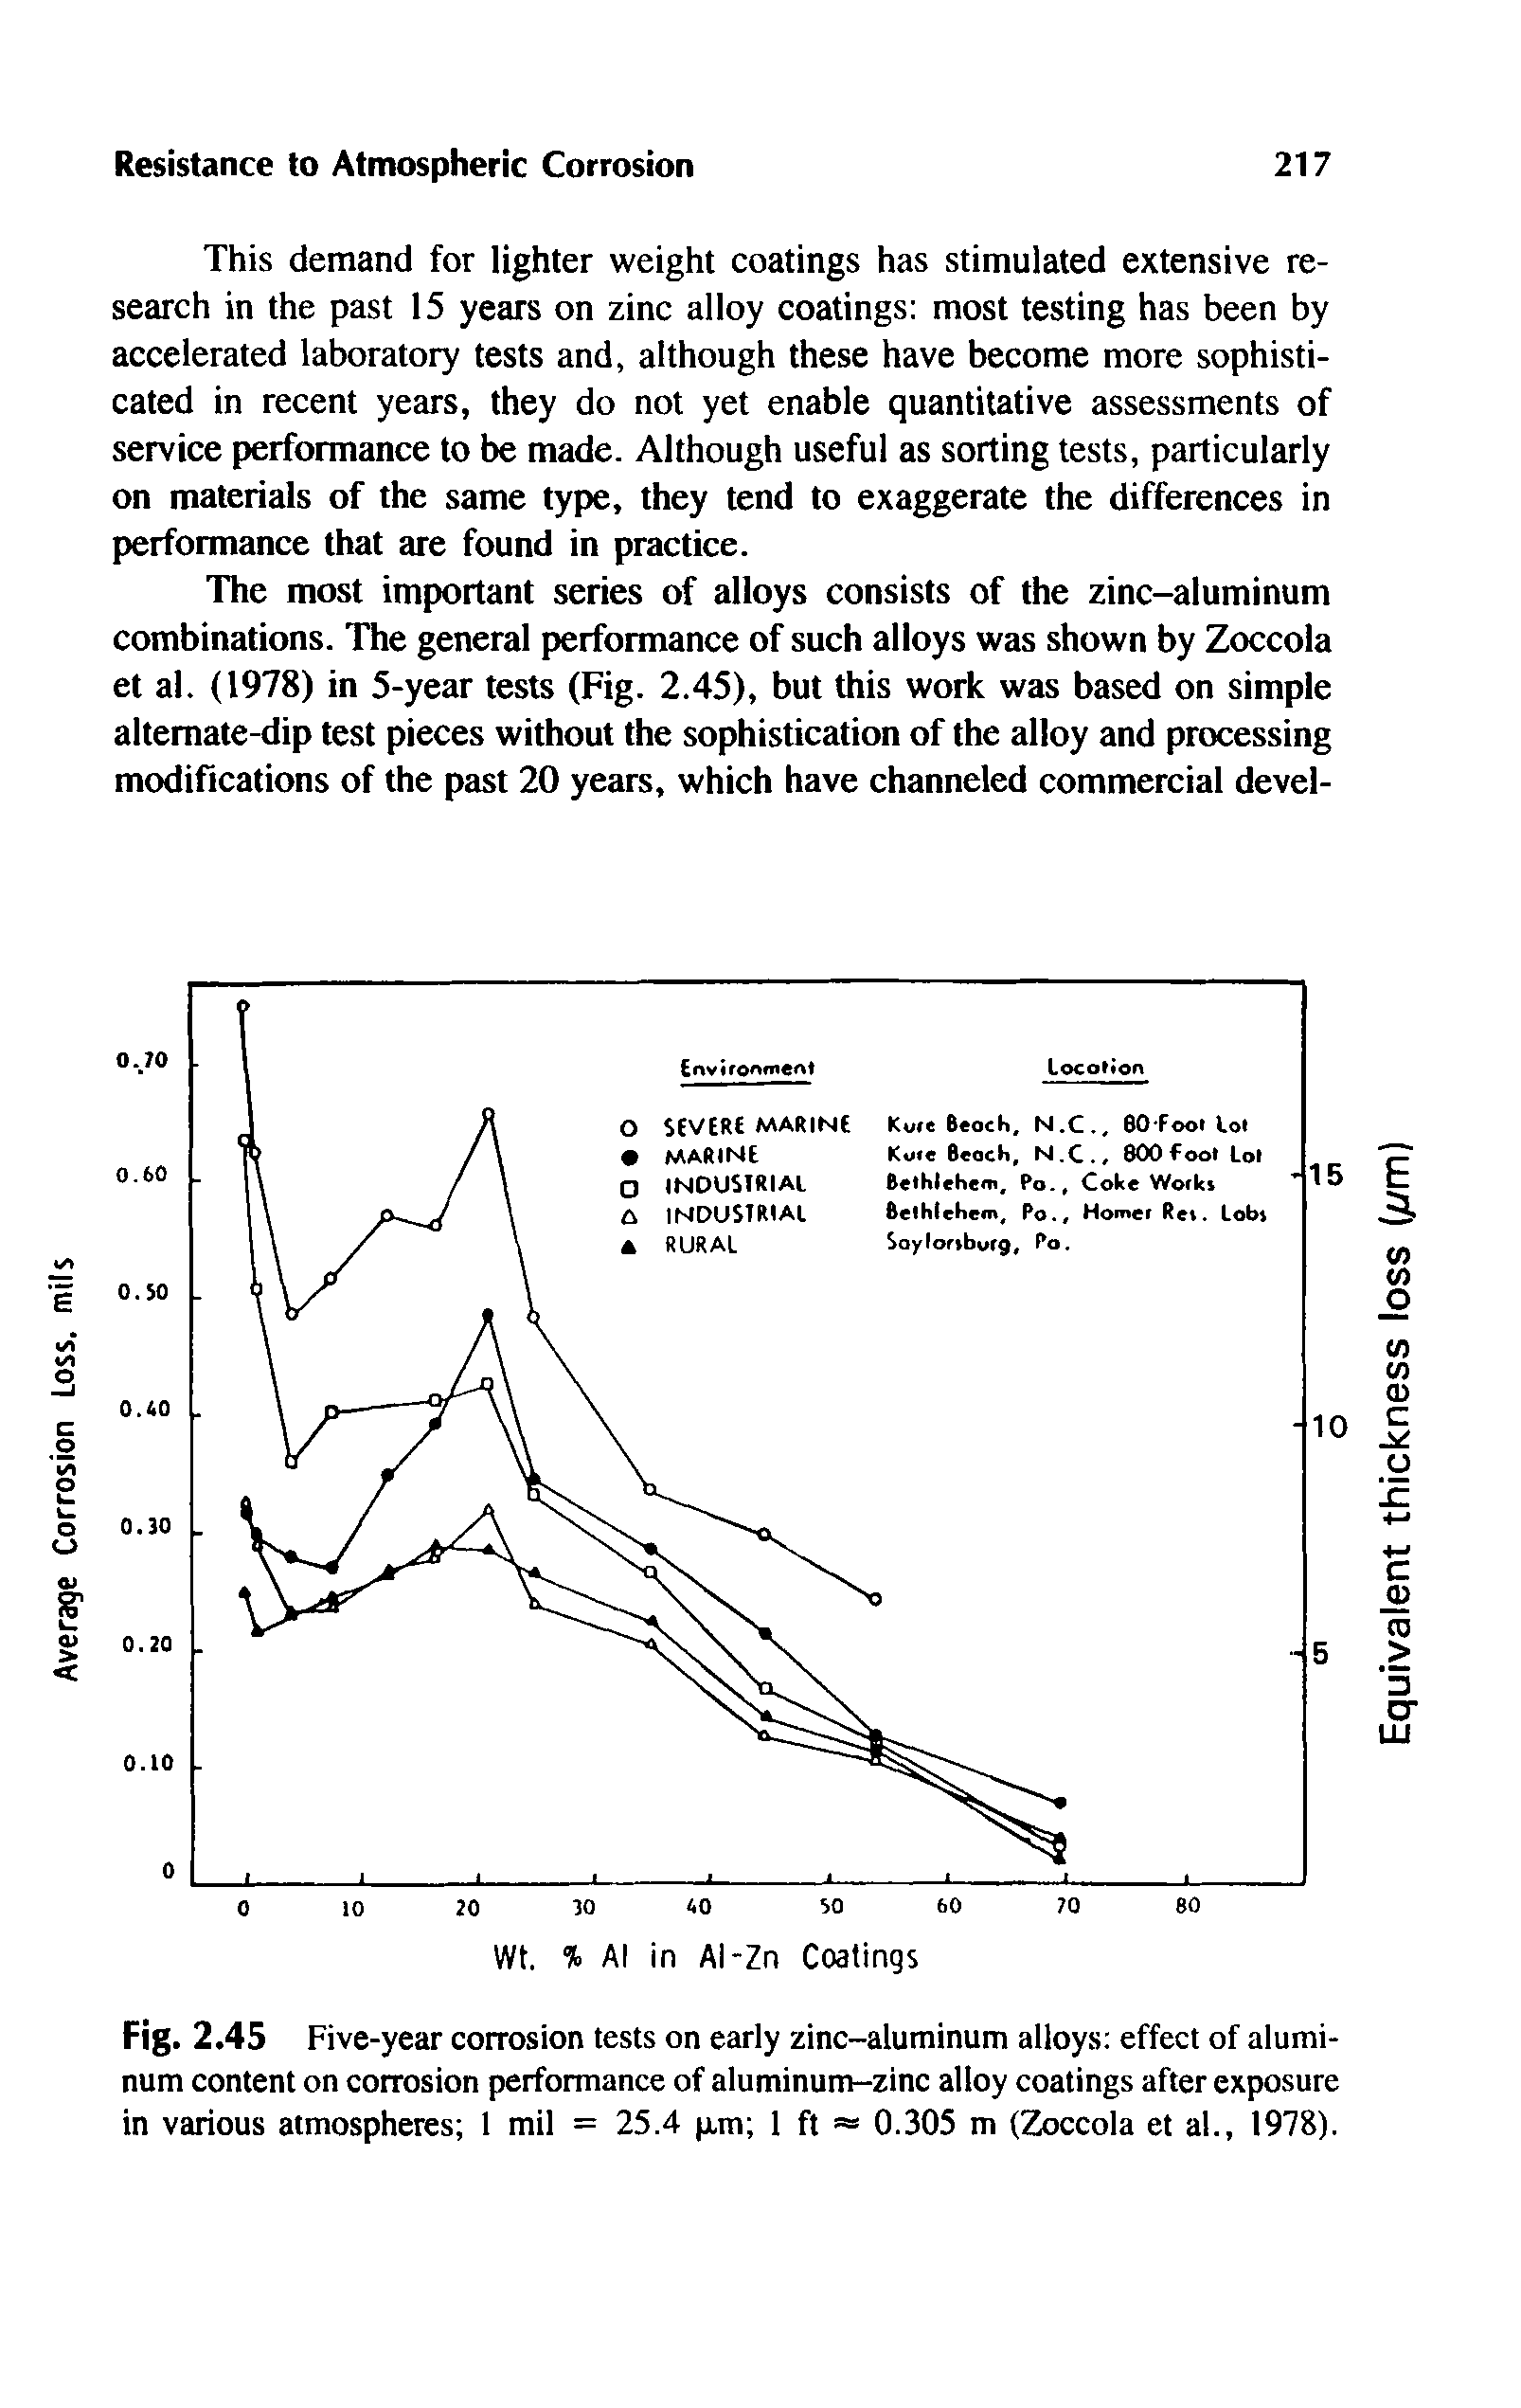 Fig. 2.45 Five-year corrosion tests on early zinc-aluminum alloys effect of aluminum content on corrosion performance of aluminum-zinc alloy coatings after exposure in various atmospheres 1 mil = 25.4 p,m 1 ft 0.305 m (Zoccola et al., 1978).